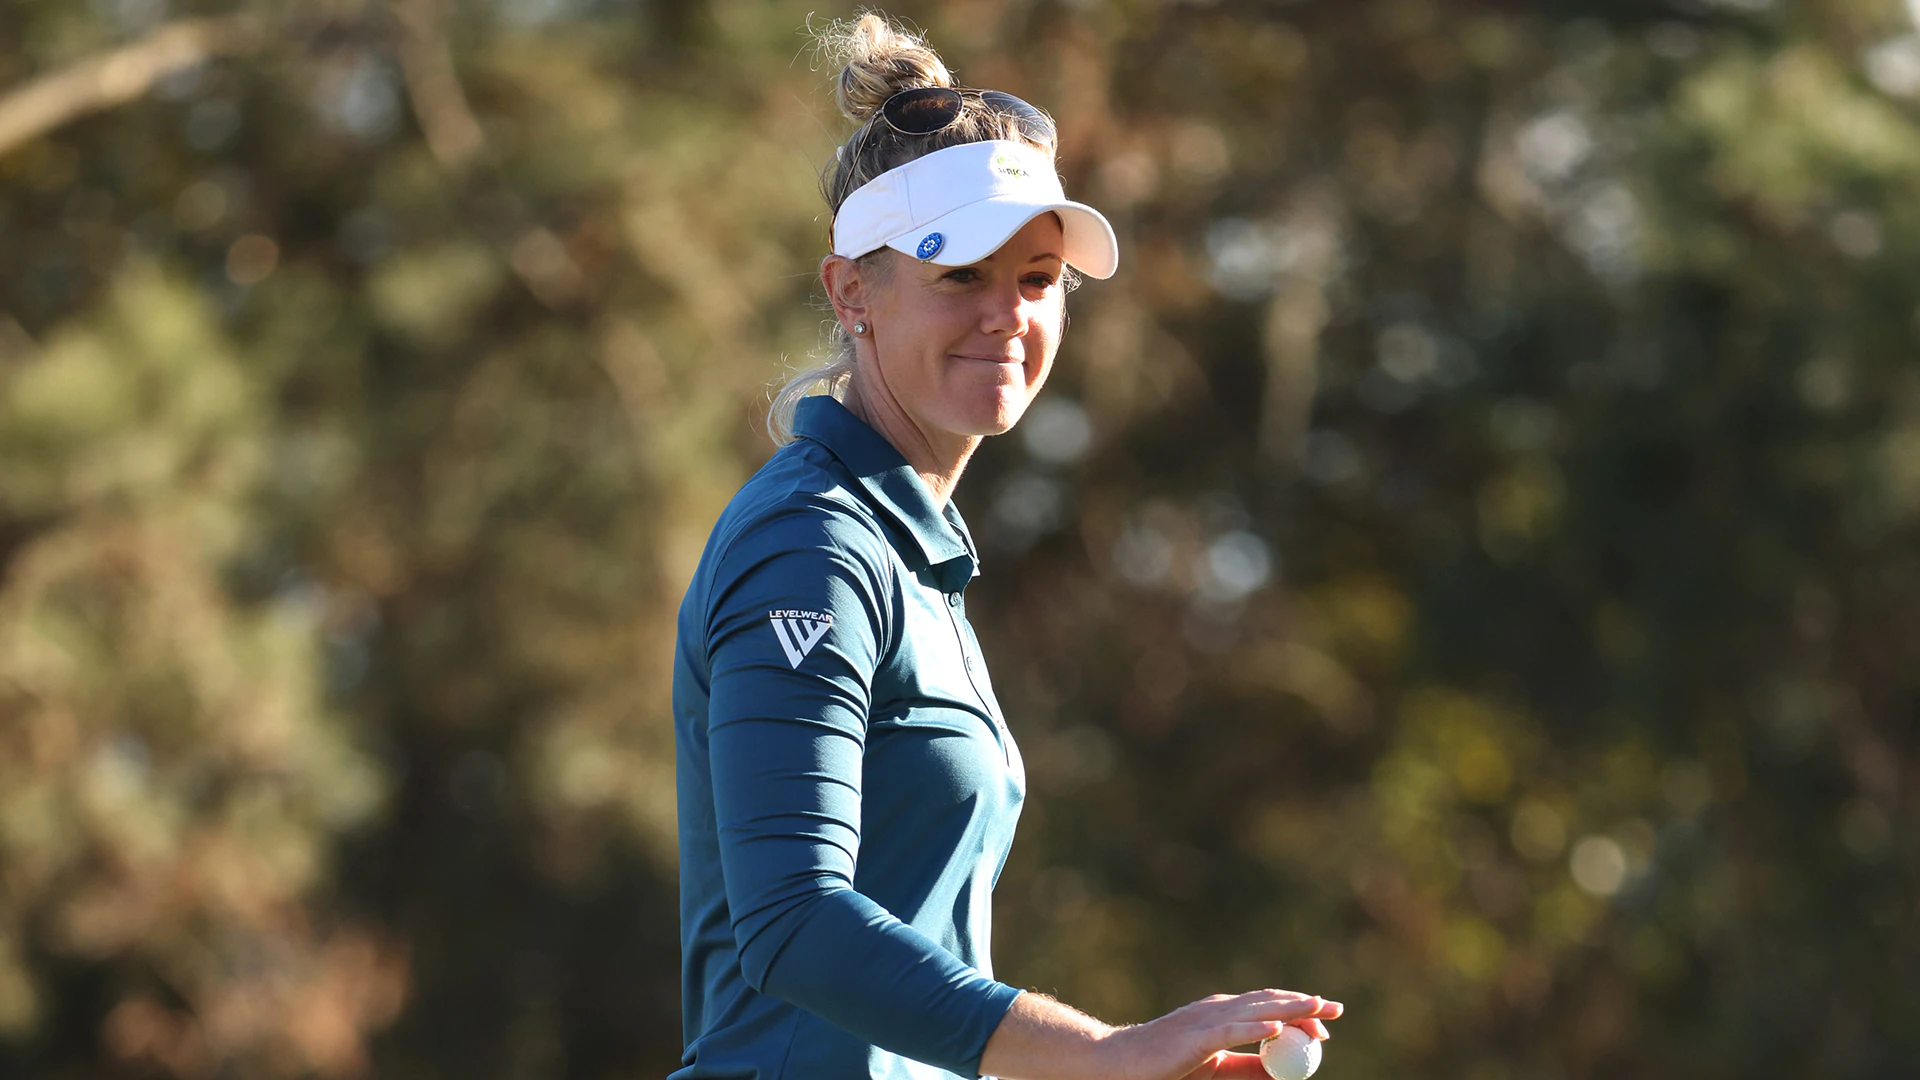 Search for first win continues to test patience of USWO leader Amy Olson